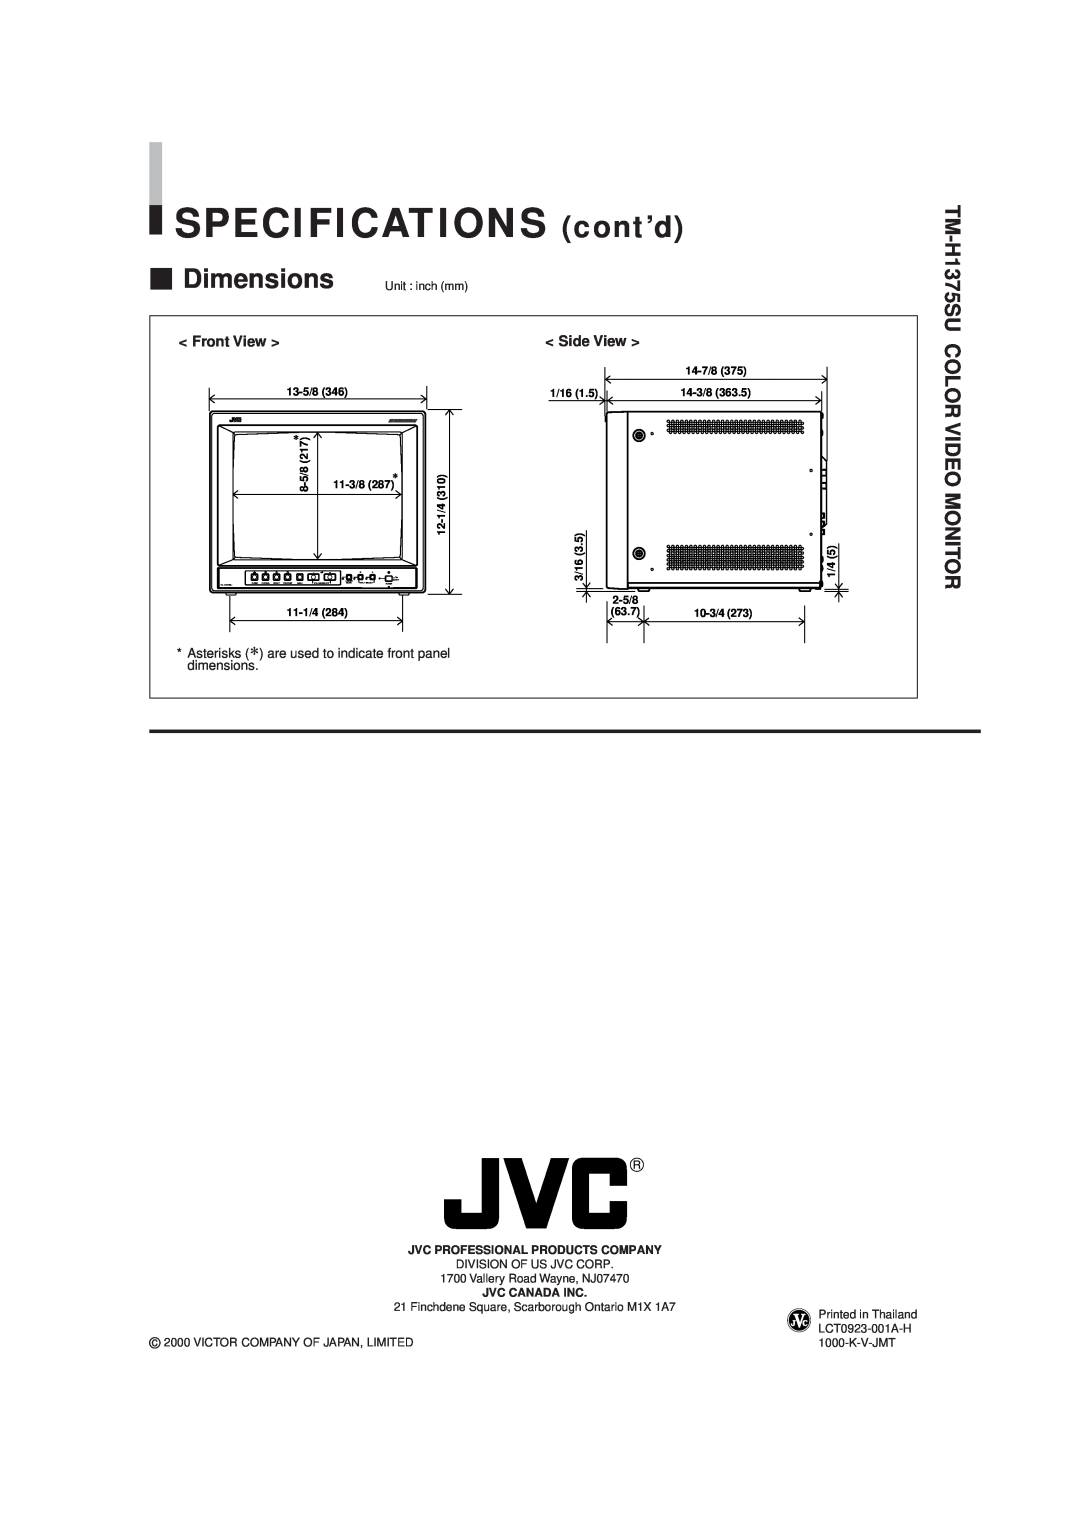 JVC TM-H1375SU SPECIFICATIONS cont’d, Color Video Monitor, Front View, Side View, Dimensions, 13-5/8, 11-3/8, 11-1/4, 3/16 